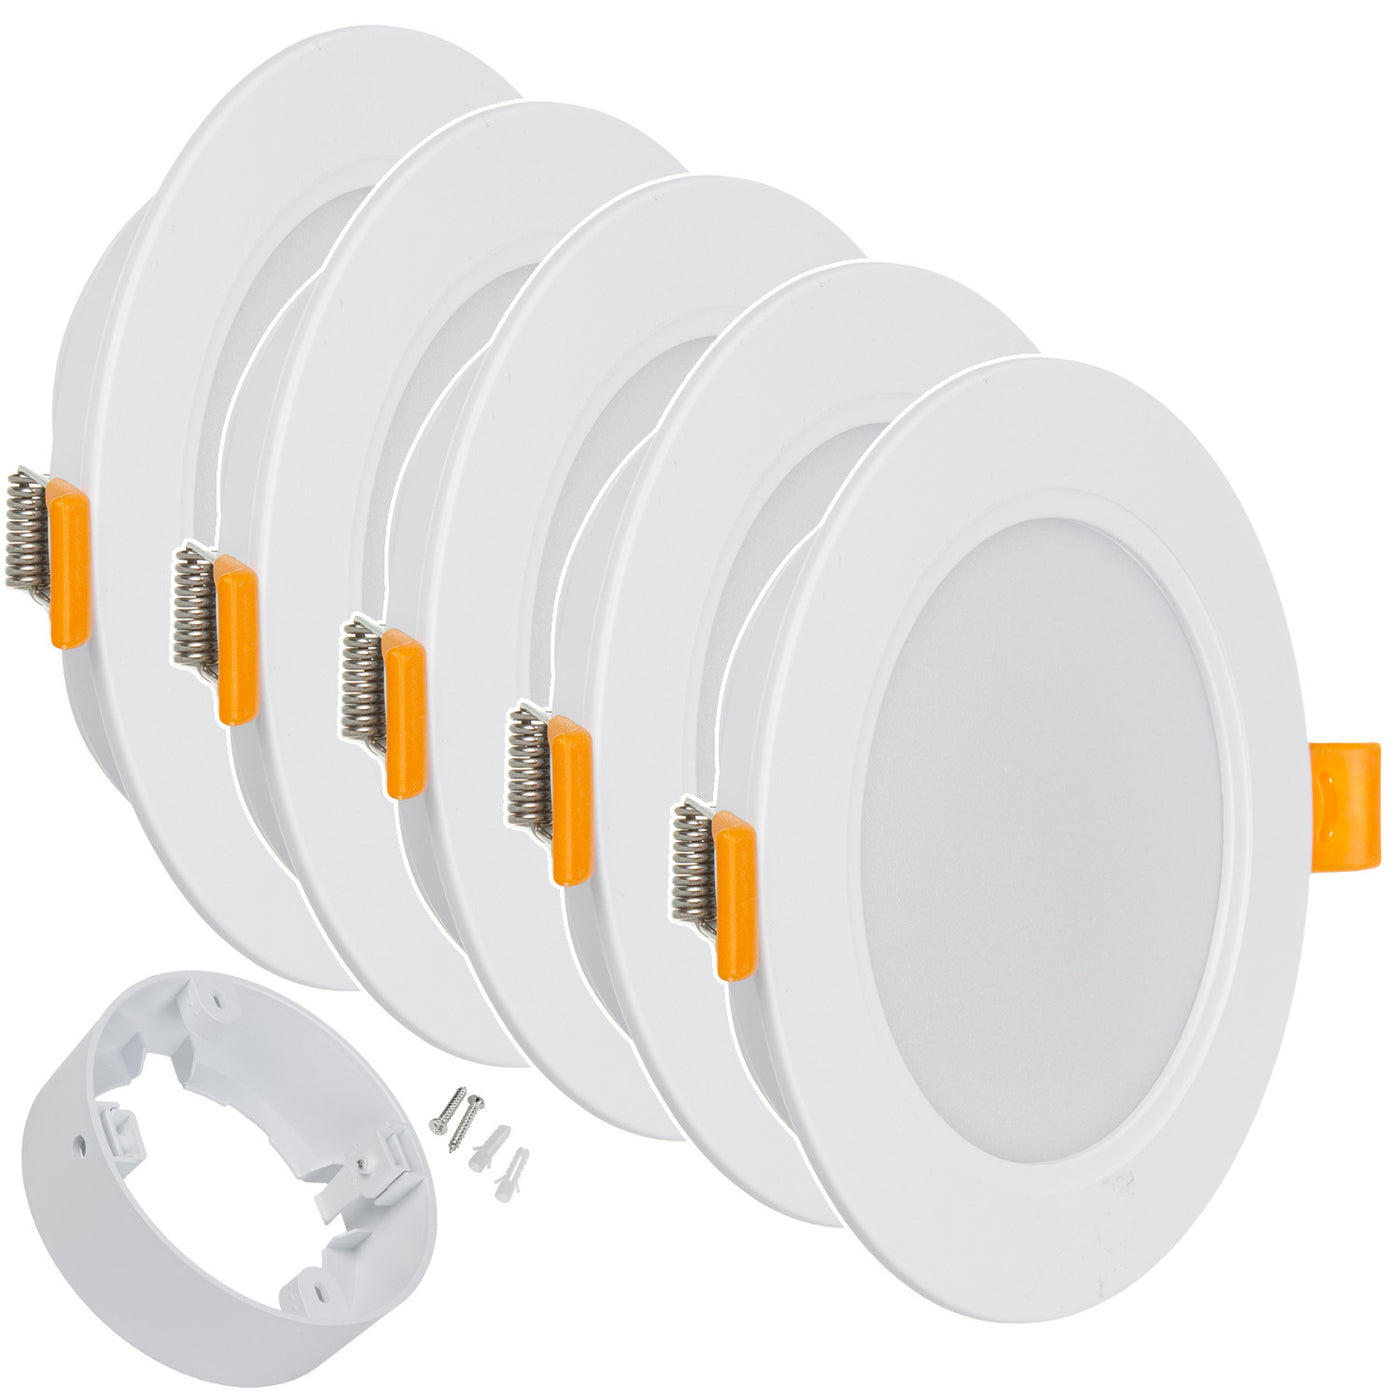 5x panel LED sufitowy Maclean, podtynkowy SLIM, 9W, Neutral White 4000K, 120*26mm, 900lm, MCE371 R + adapter natynkowy MCE376 R